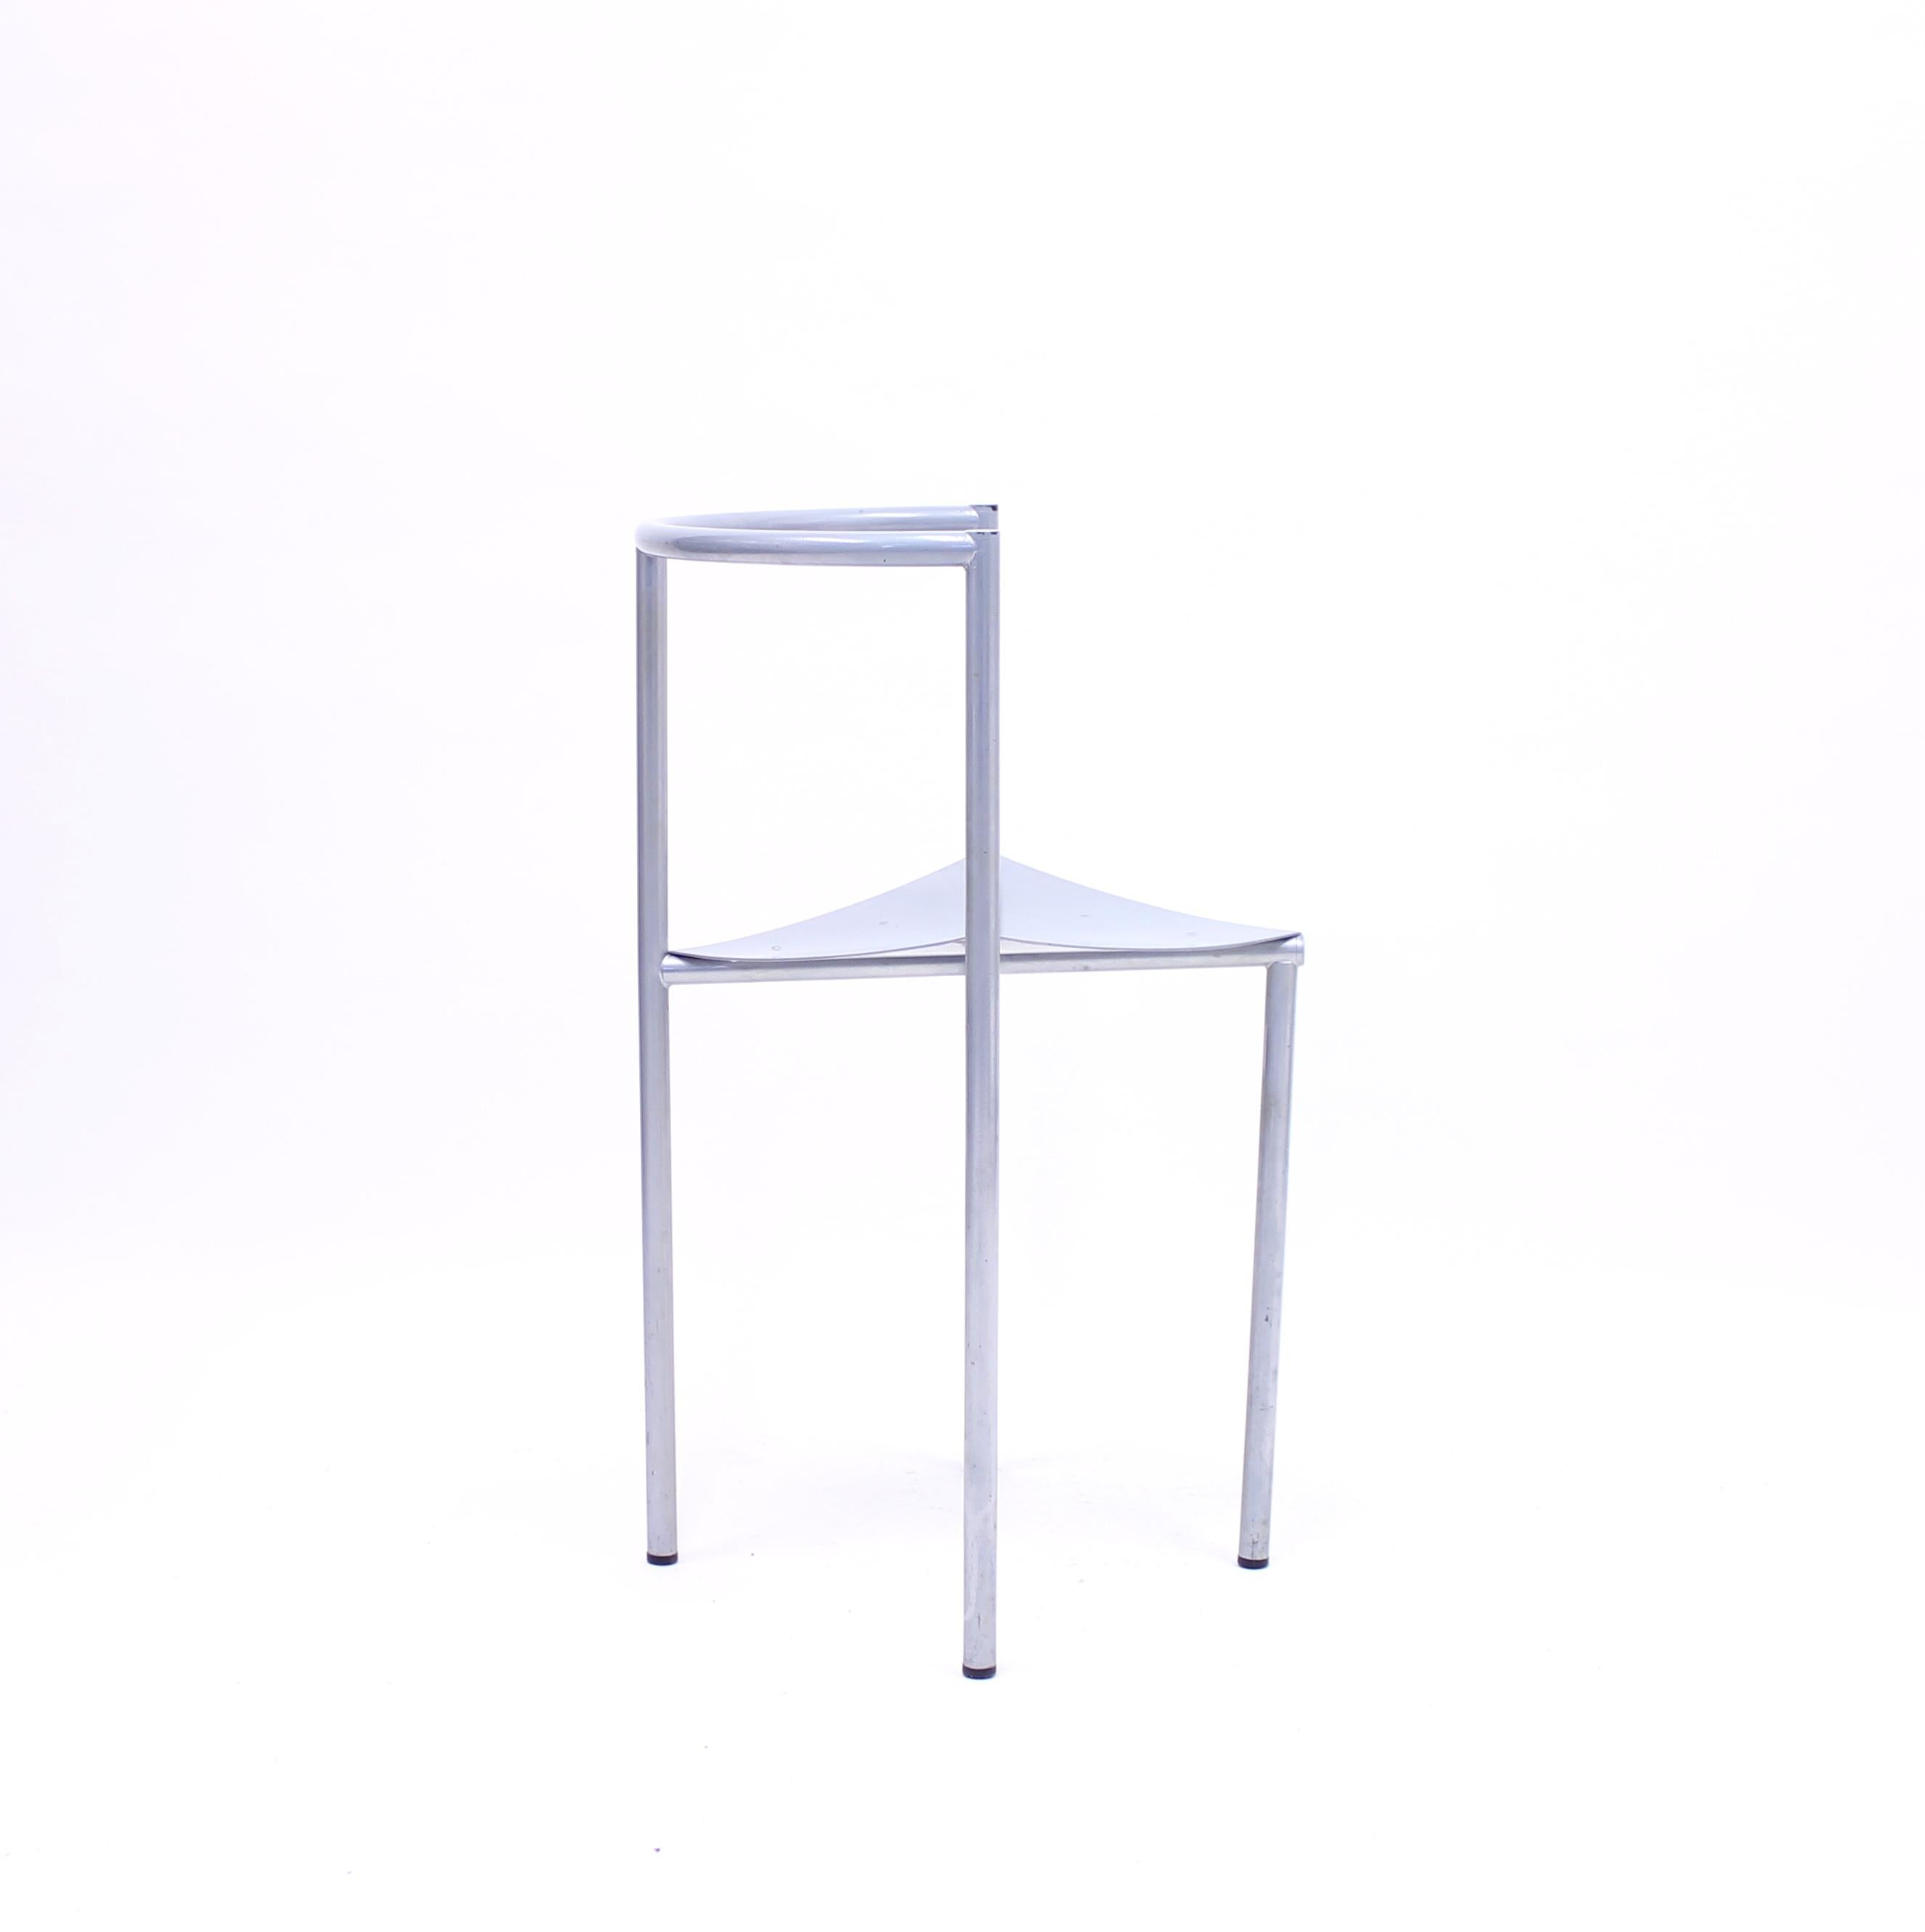 Philippe Starck, Wendy Wright Chair, Disform, 1986 3